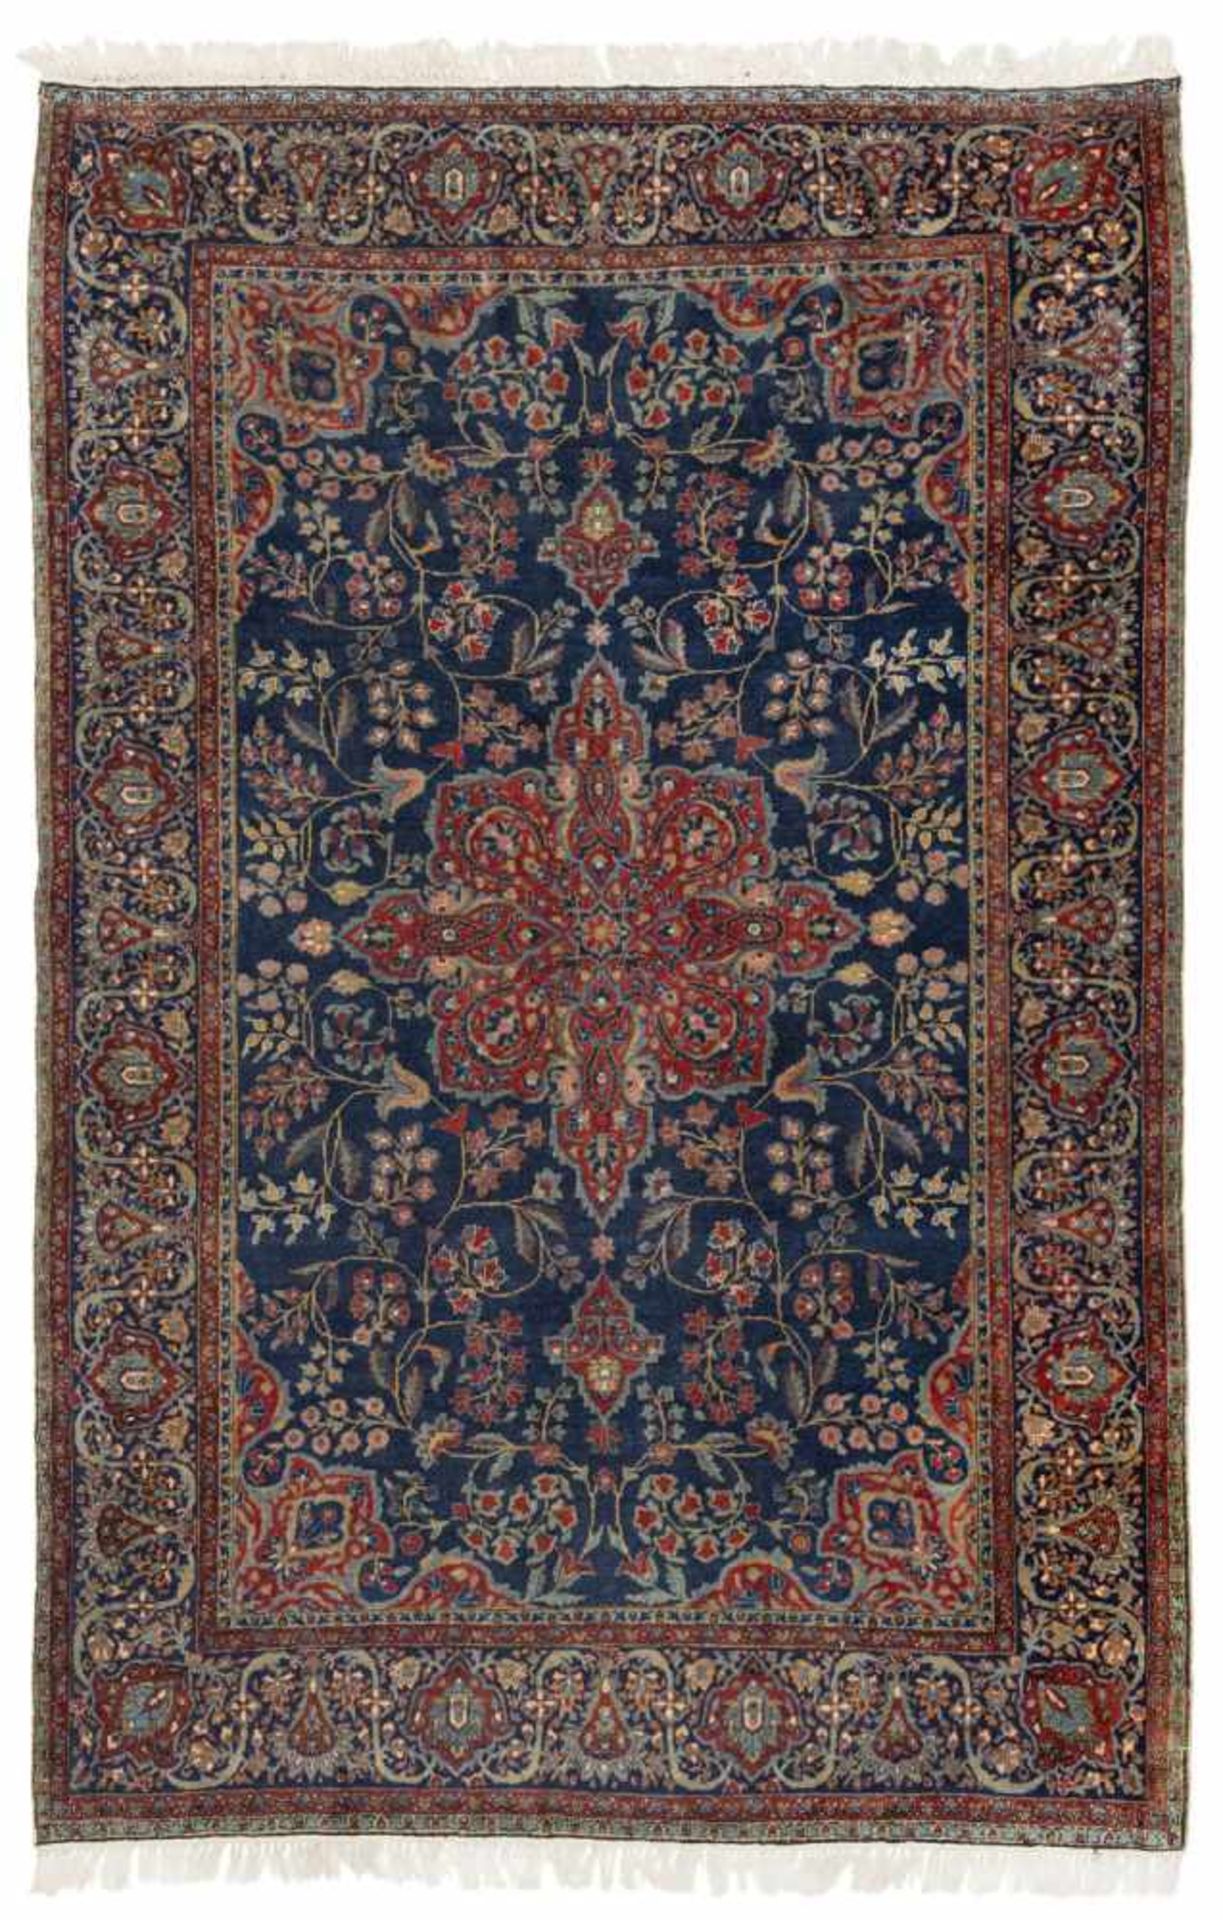 A Kashan kurk wool rug, Central Persia, c. 1920. - Provenance: From South German private property. -